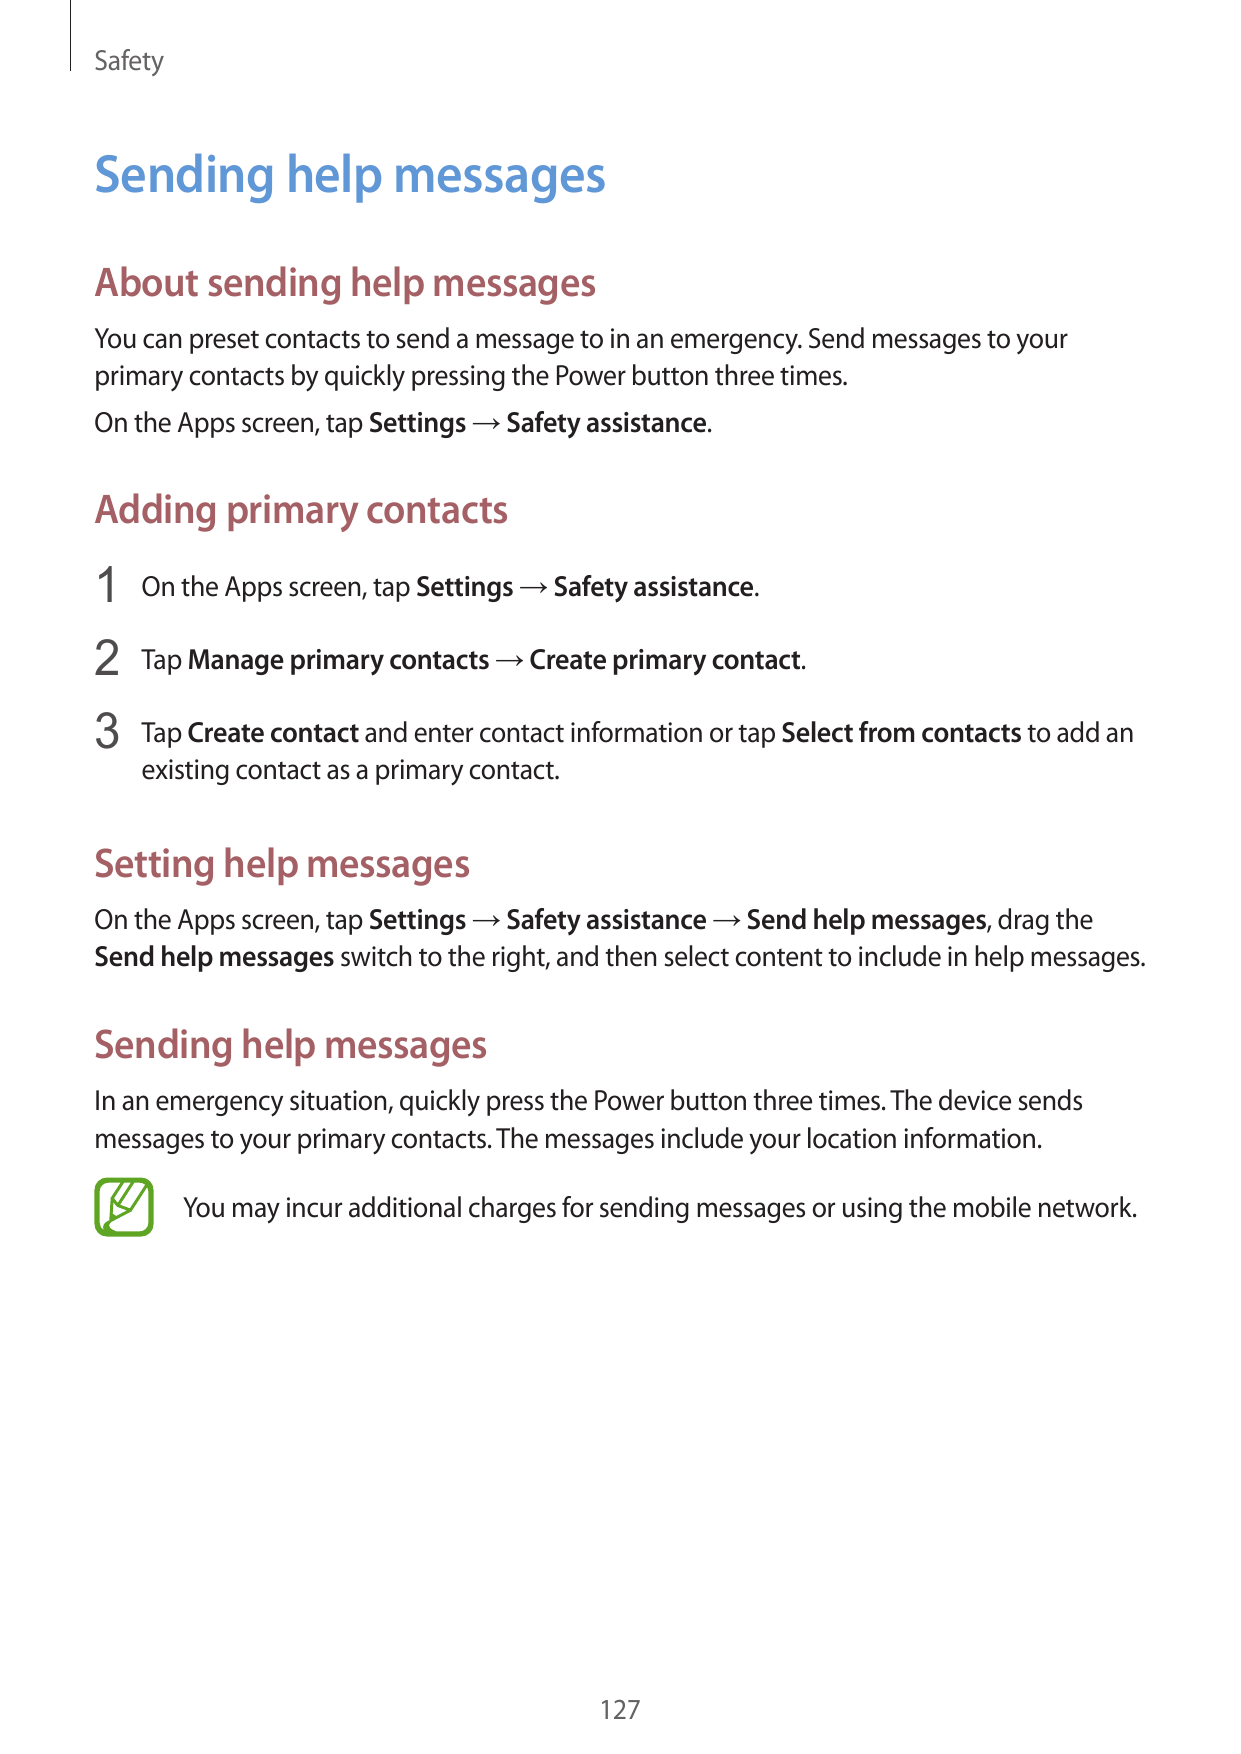 SafetySending help messagesAbout sending help messagesYou can preset contacts to send a message to in an emergency. Send message